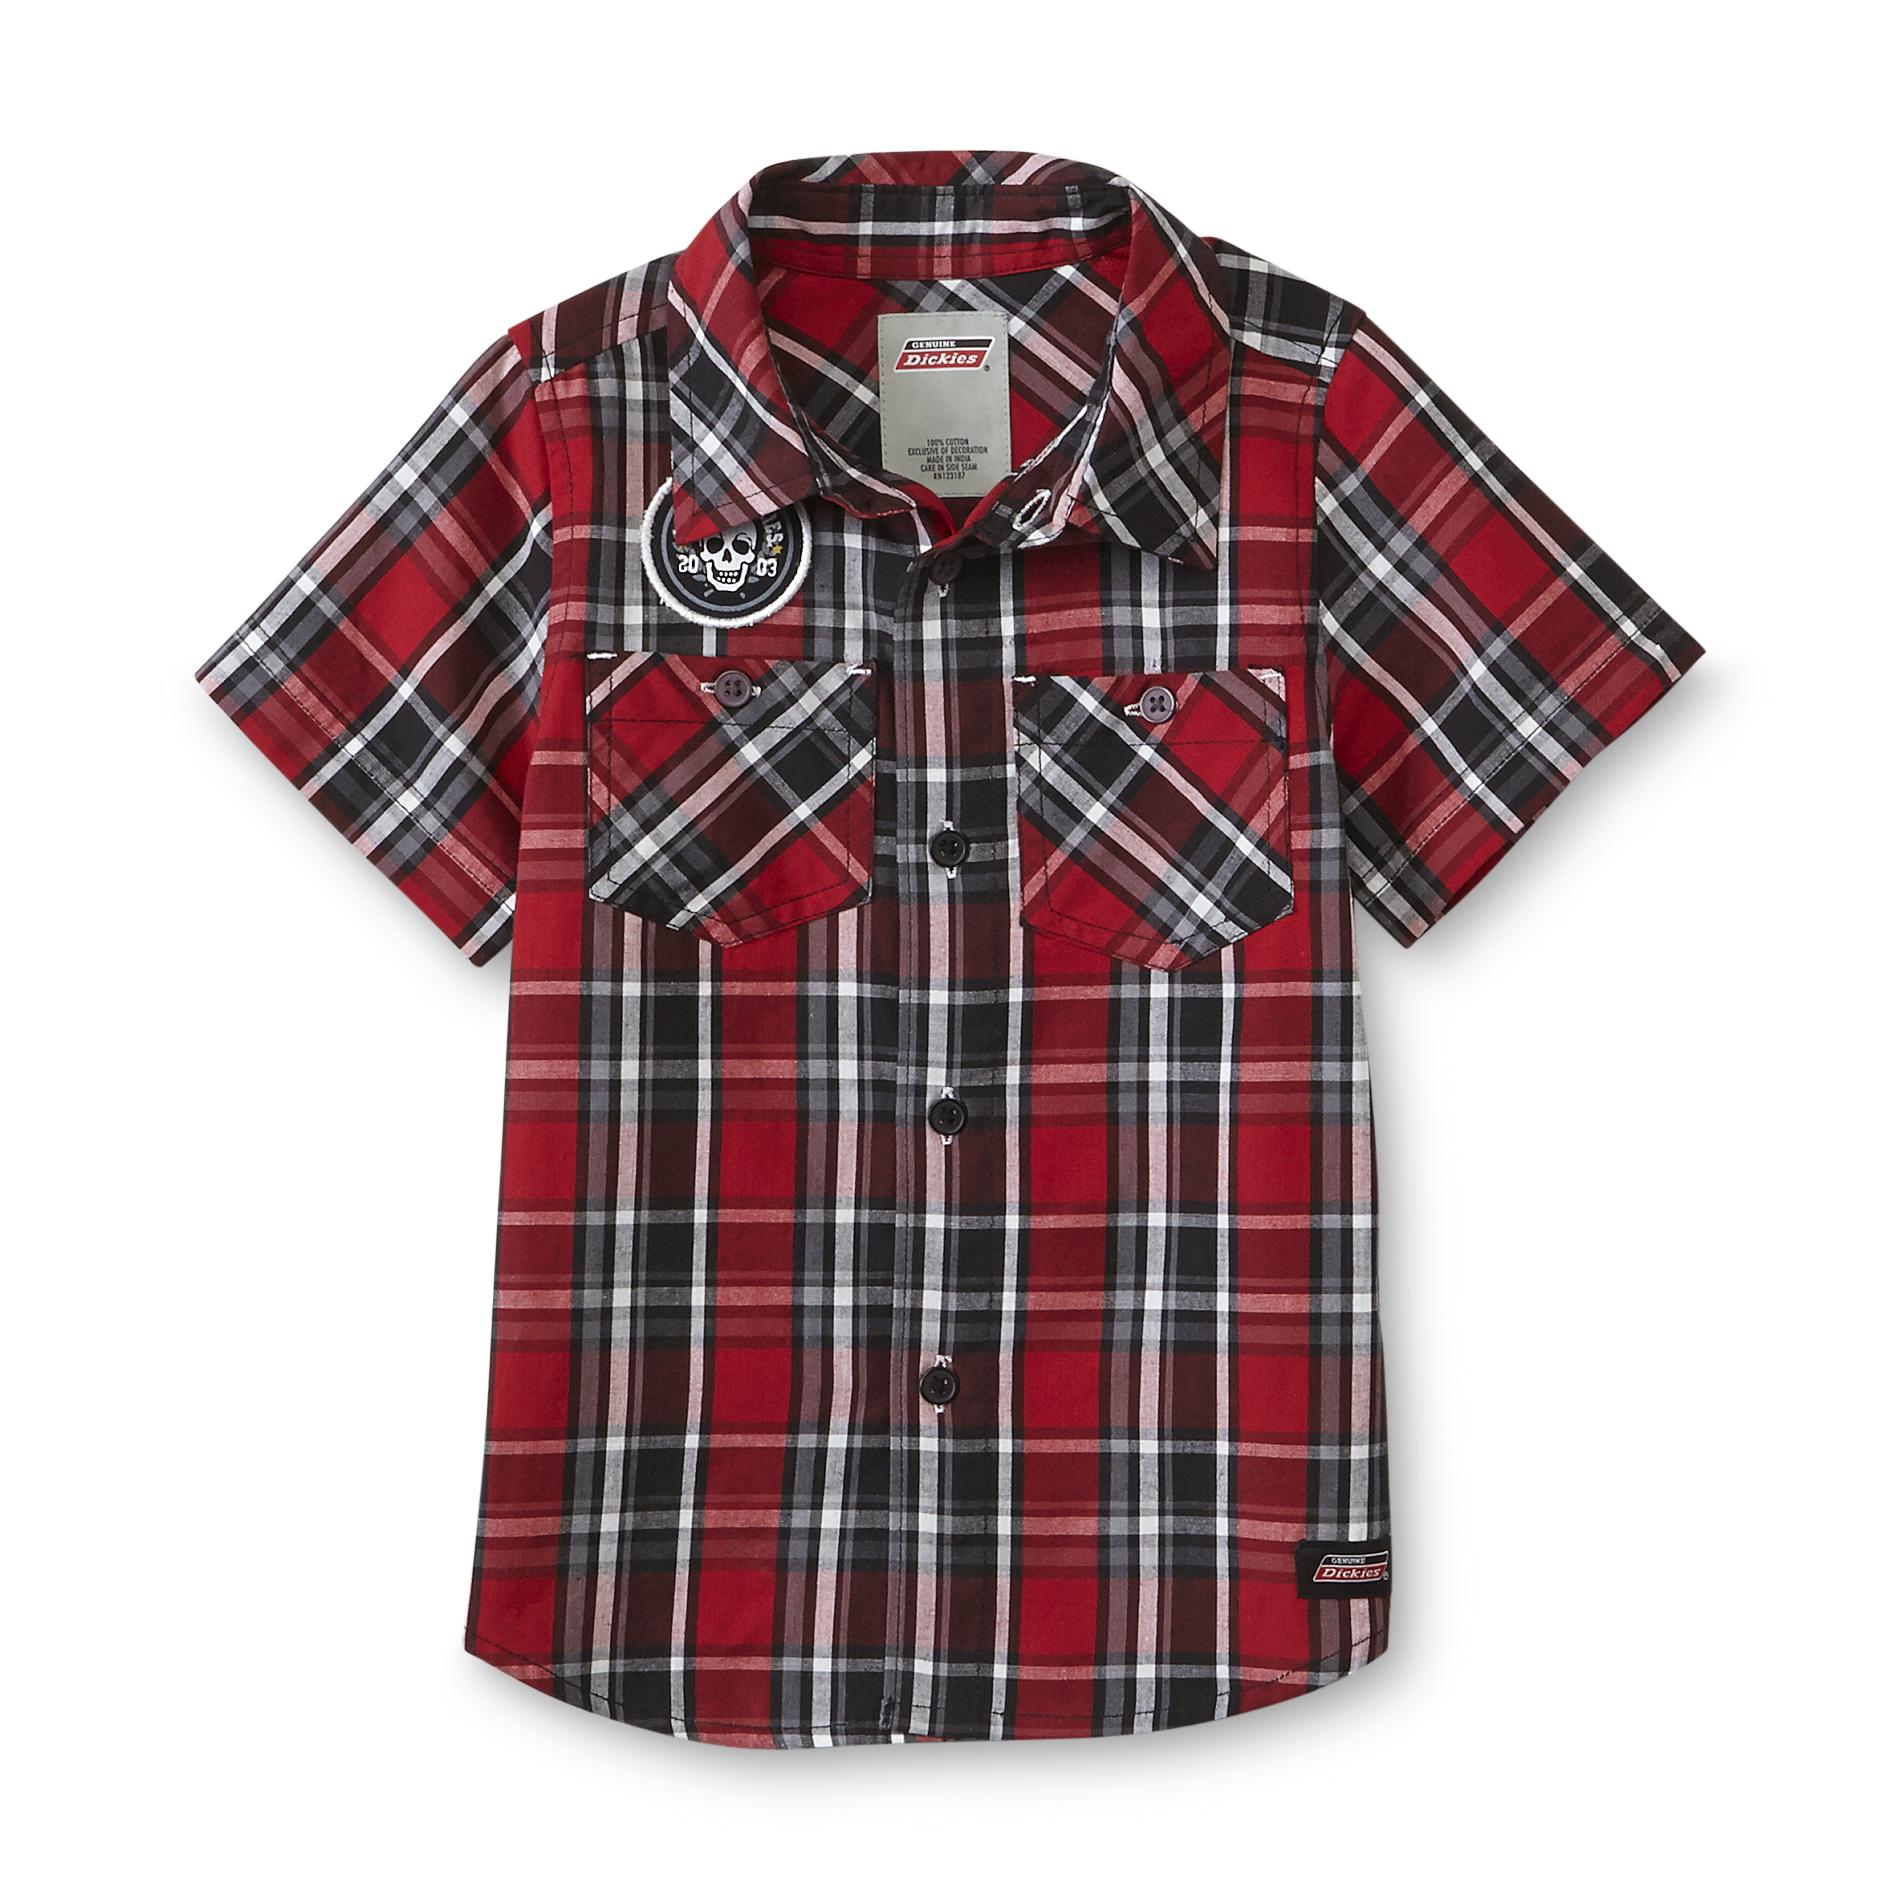 Dickies Infant & Toddler Boy's Button-Front Shirt - Skull